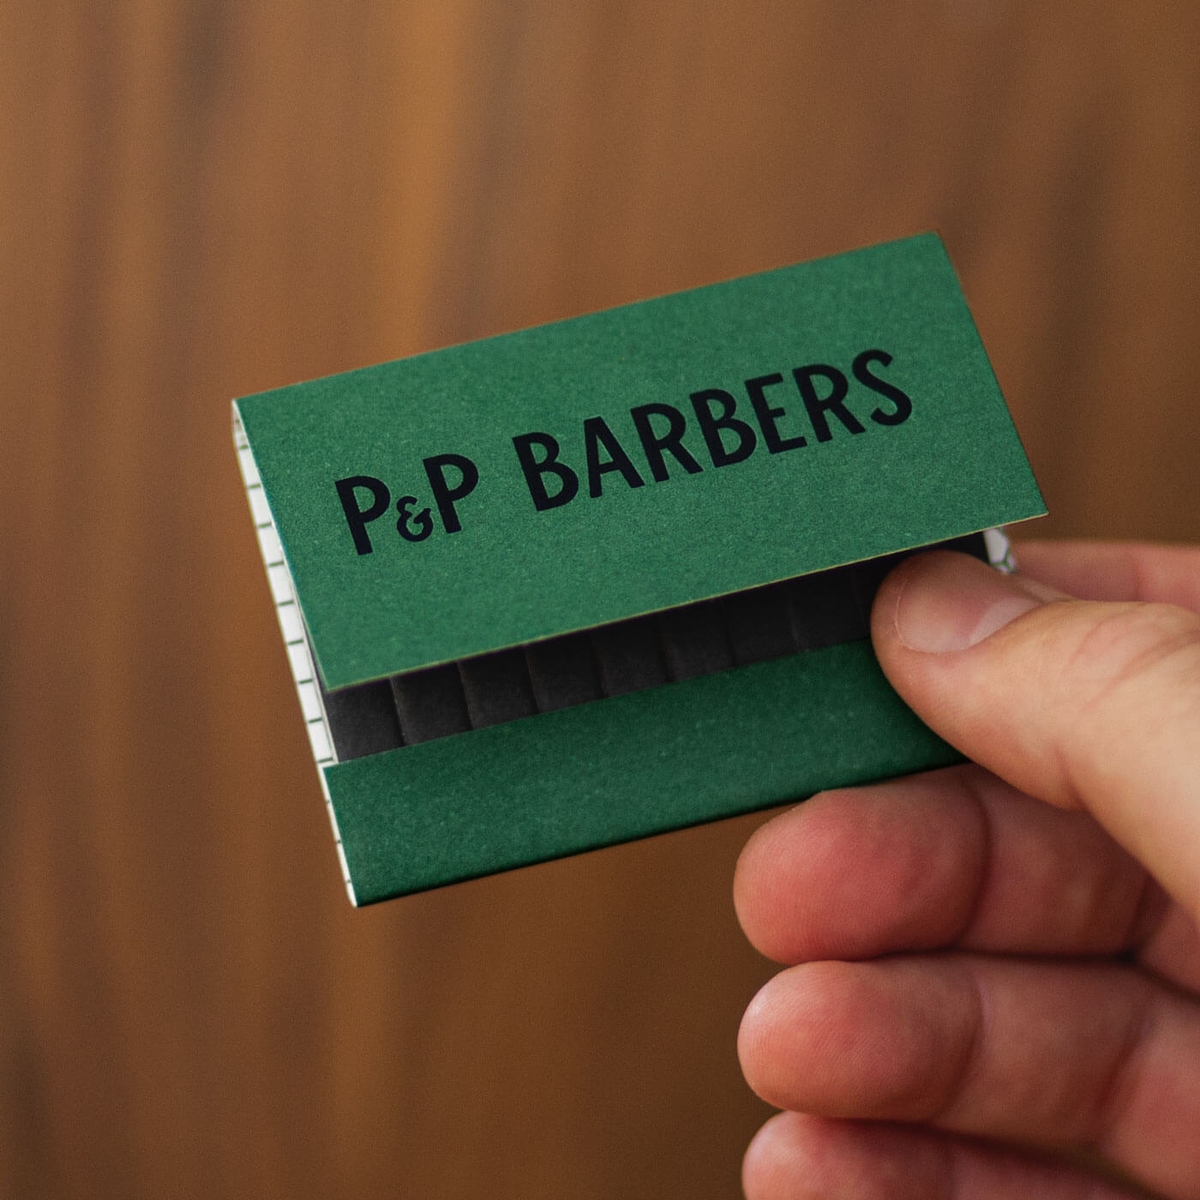 PP Barbers - Brand & Website - Branded Matches | Atollon - a design company